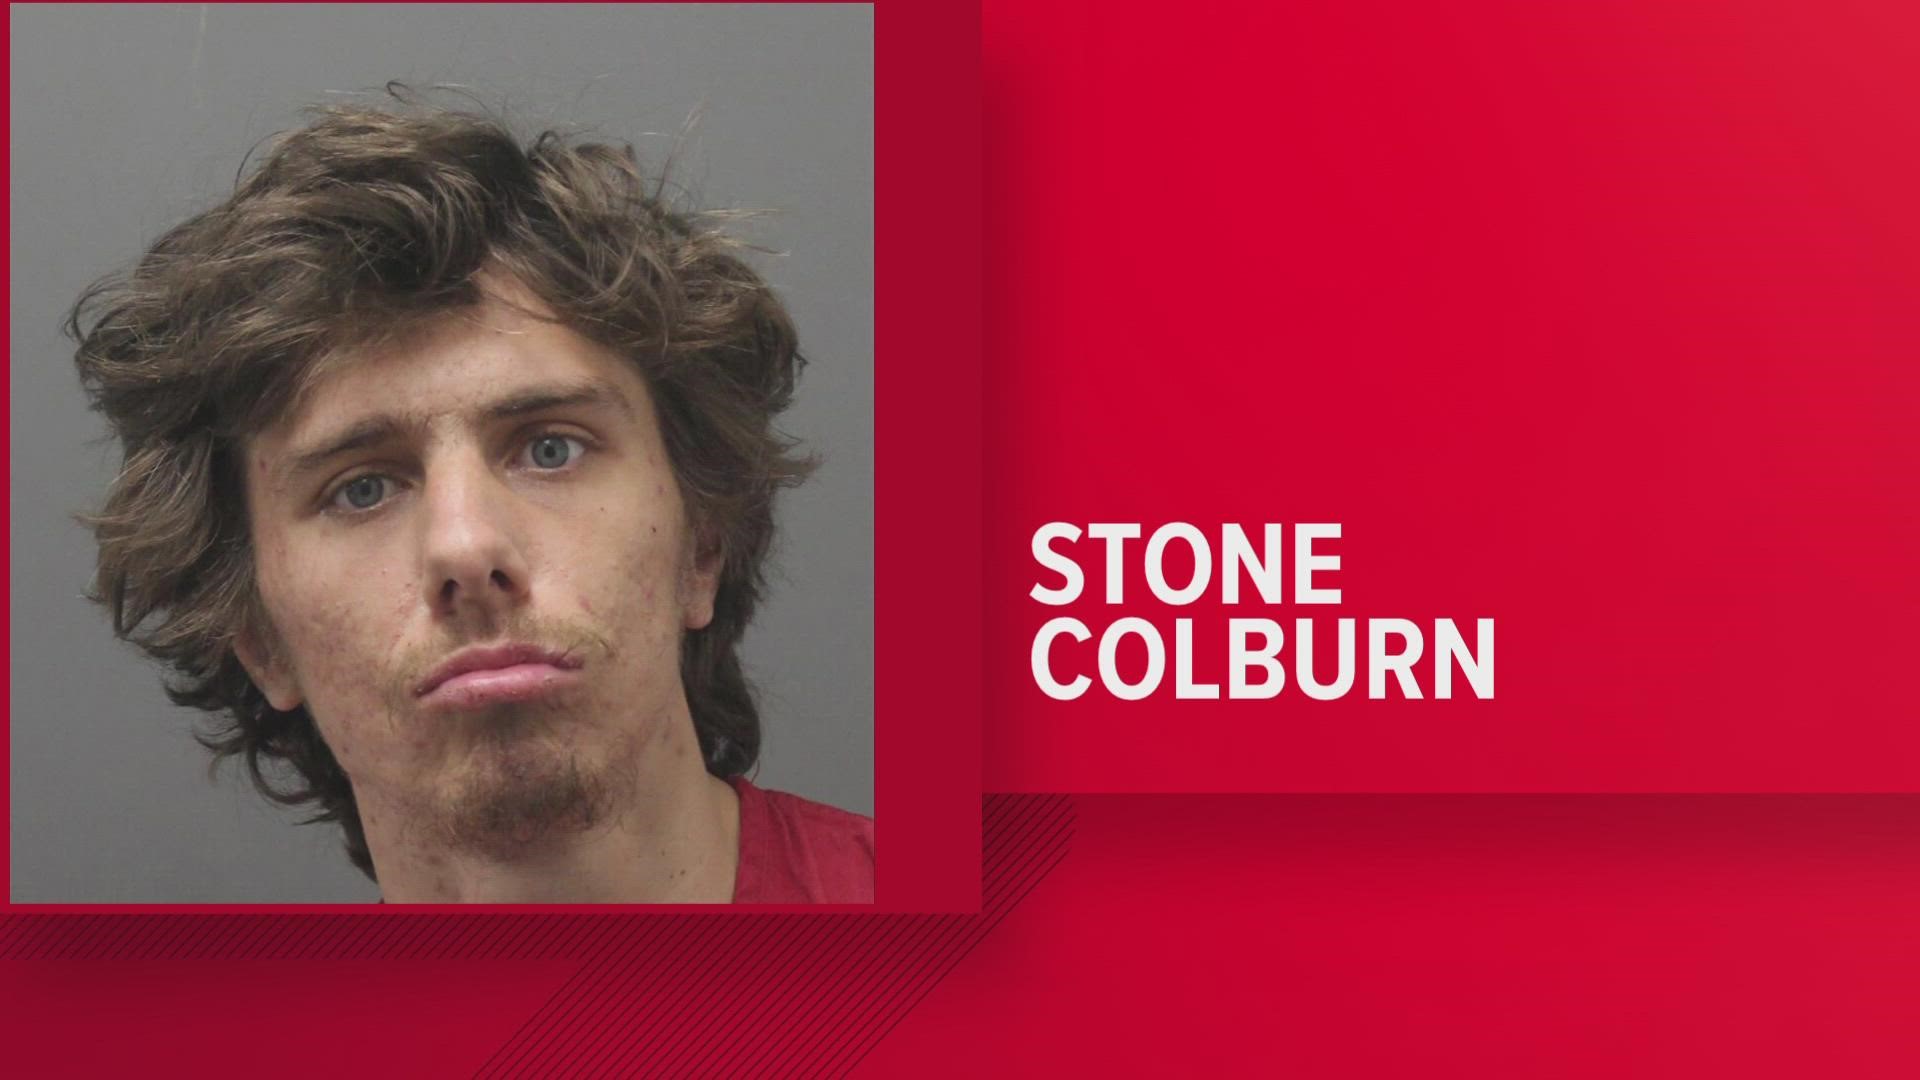 Stone L. Colburn was released from the facility after his original charges of murder were dismissed by the Office of the Commonwealth Attorney.